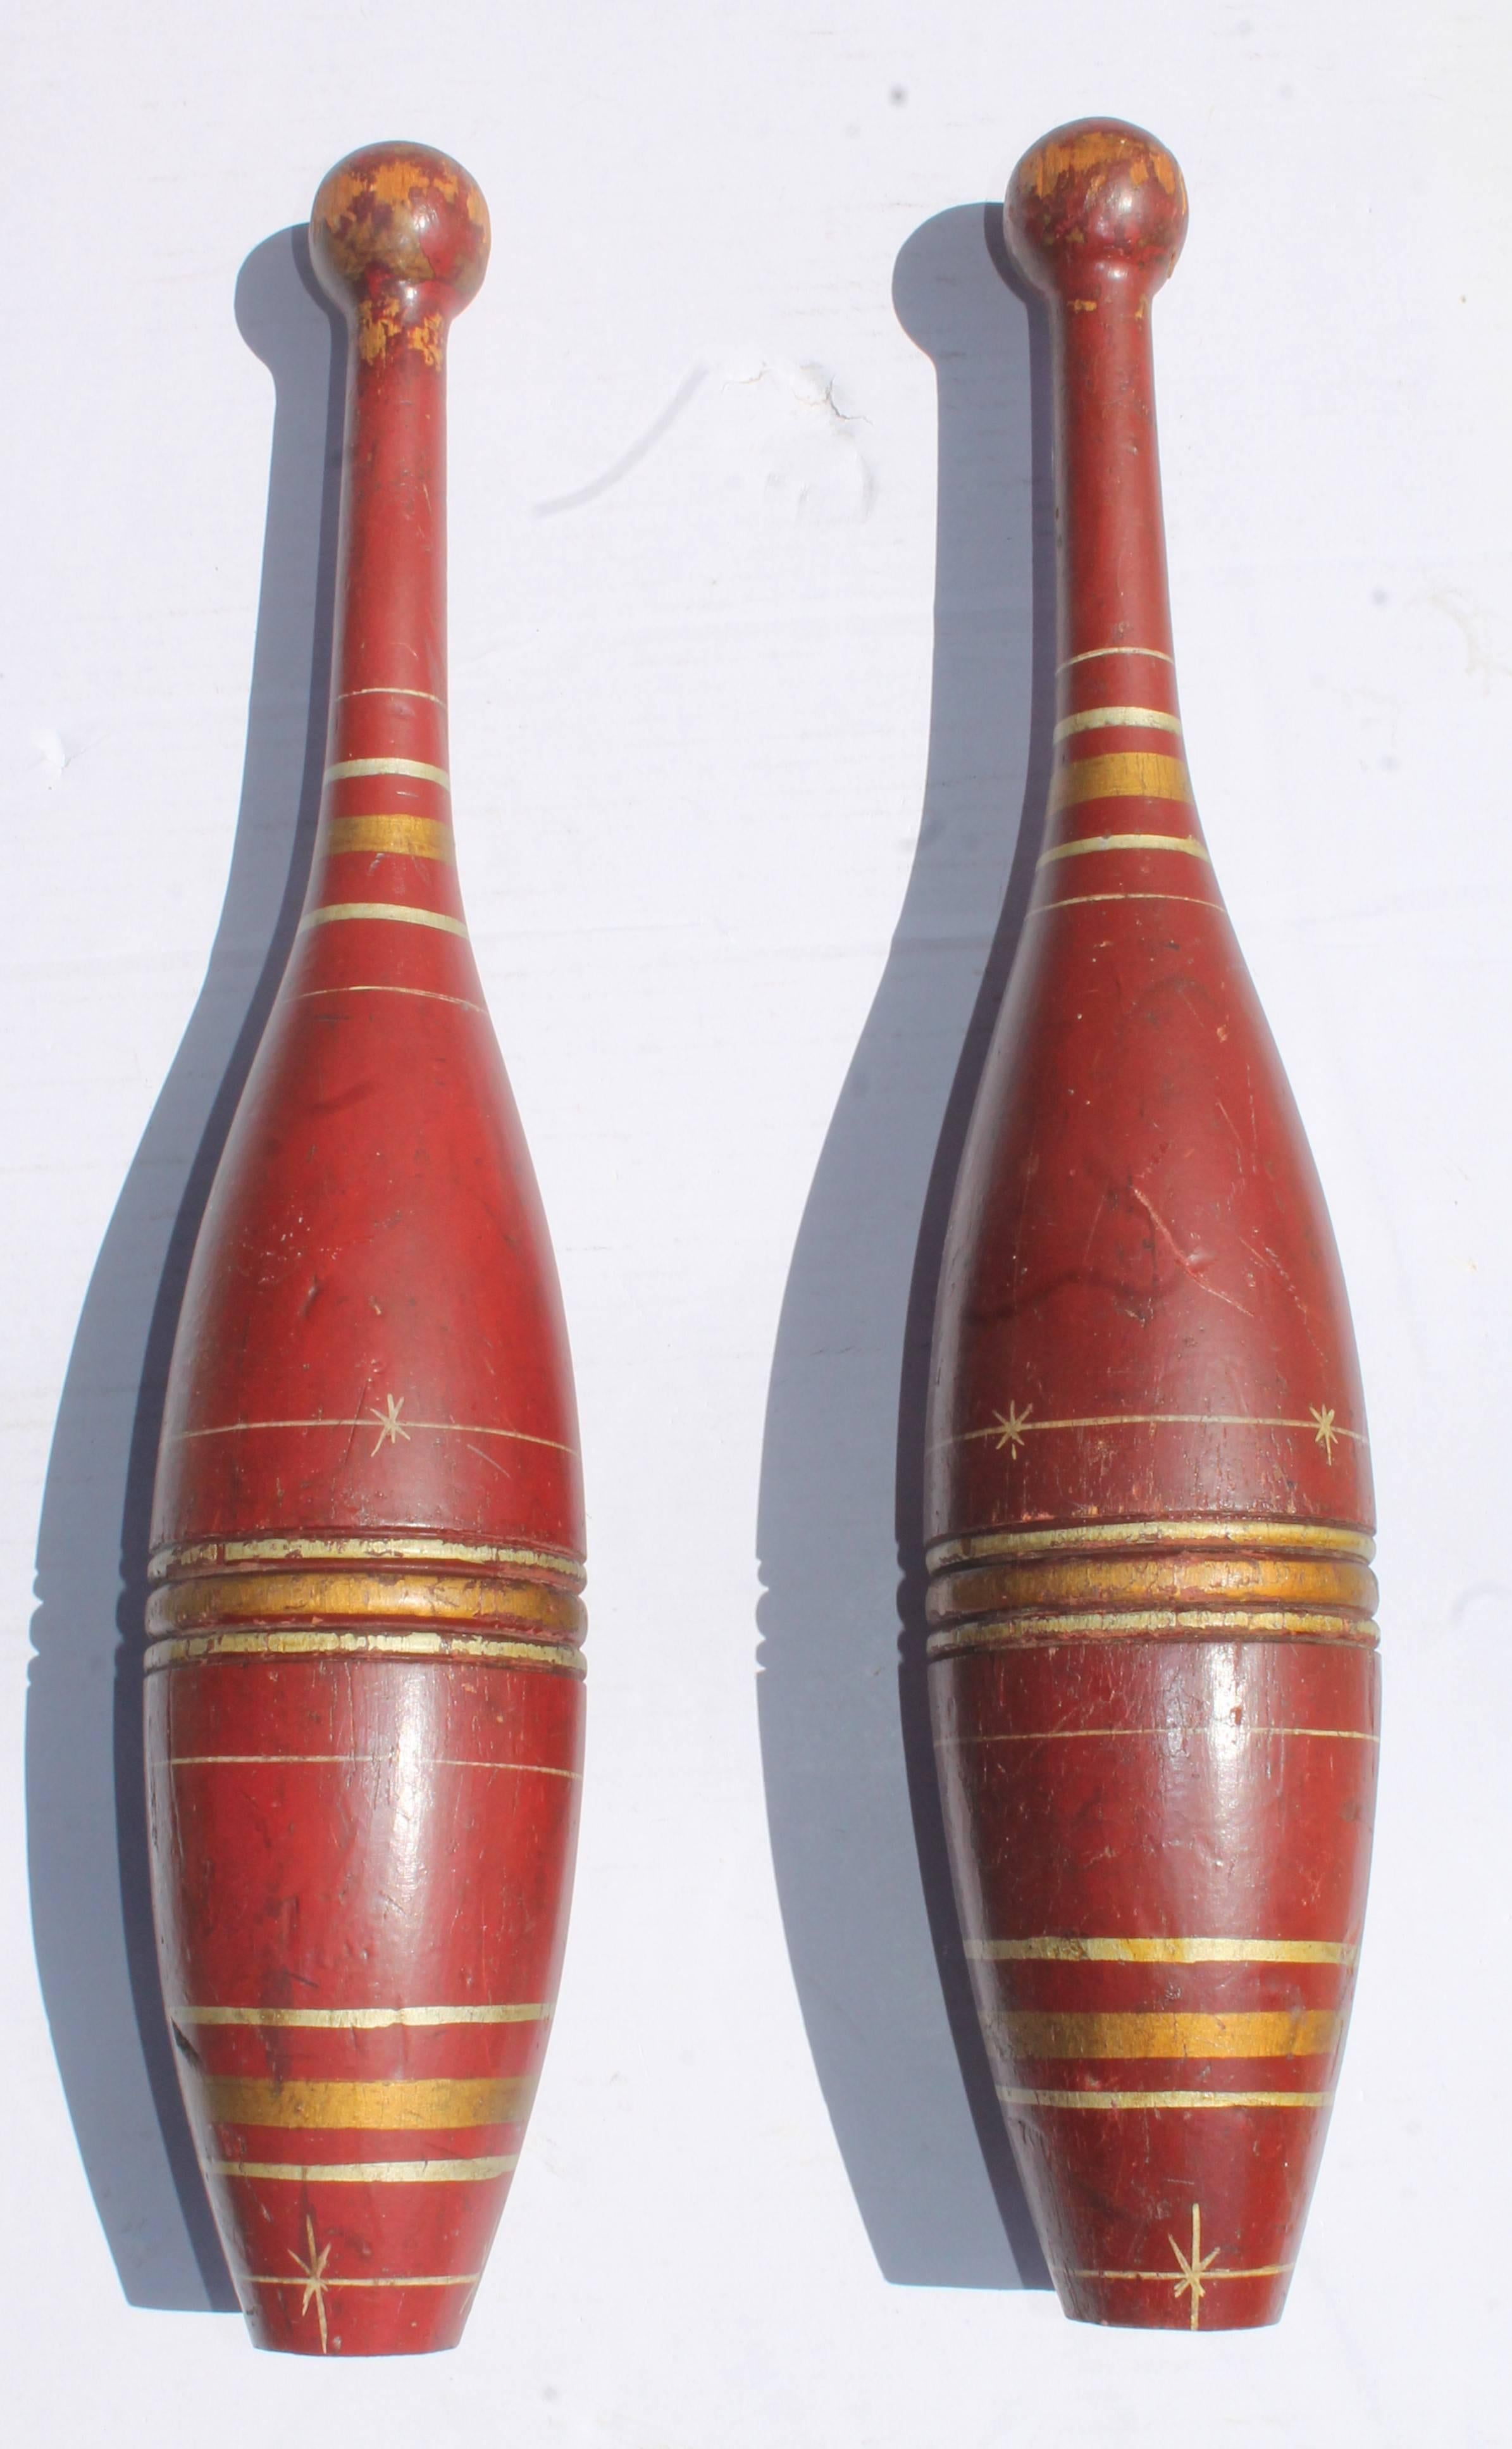 19th century original paint decorated juggling pins from New England. The condition is very good.